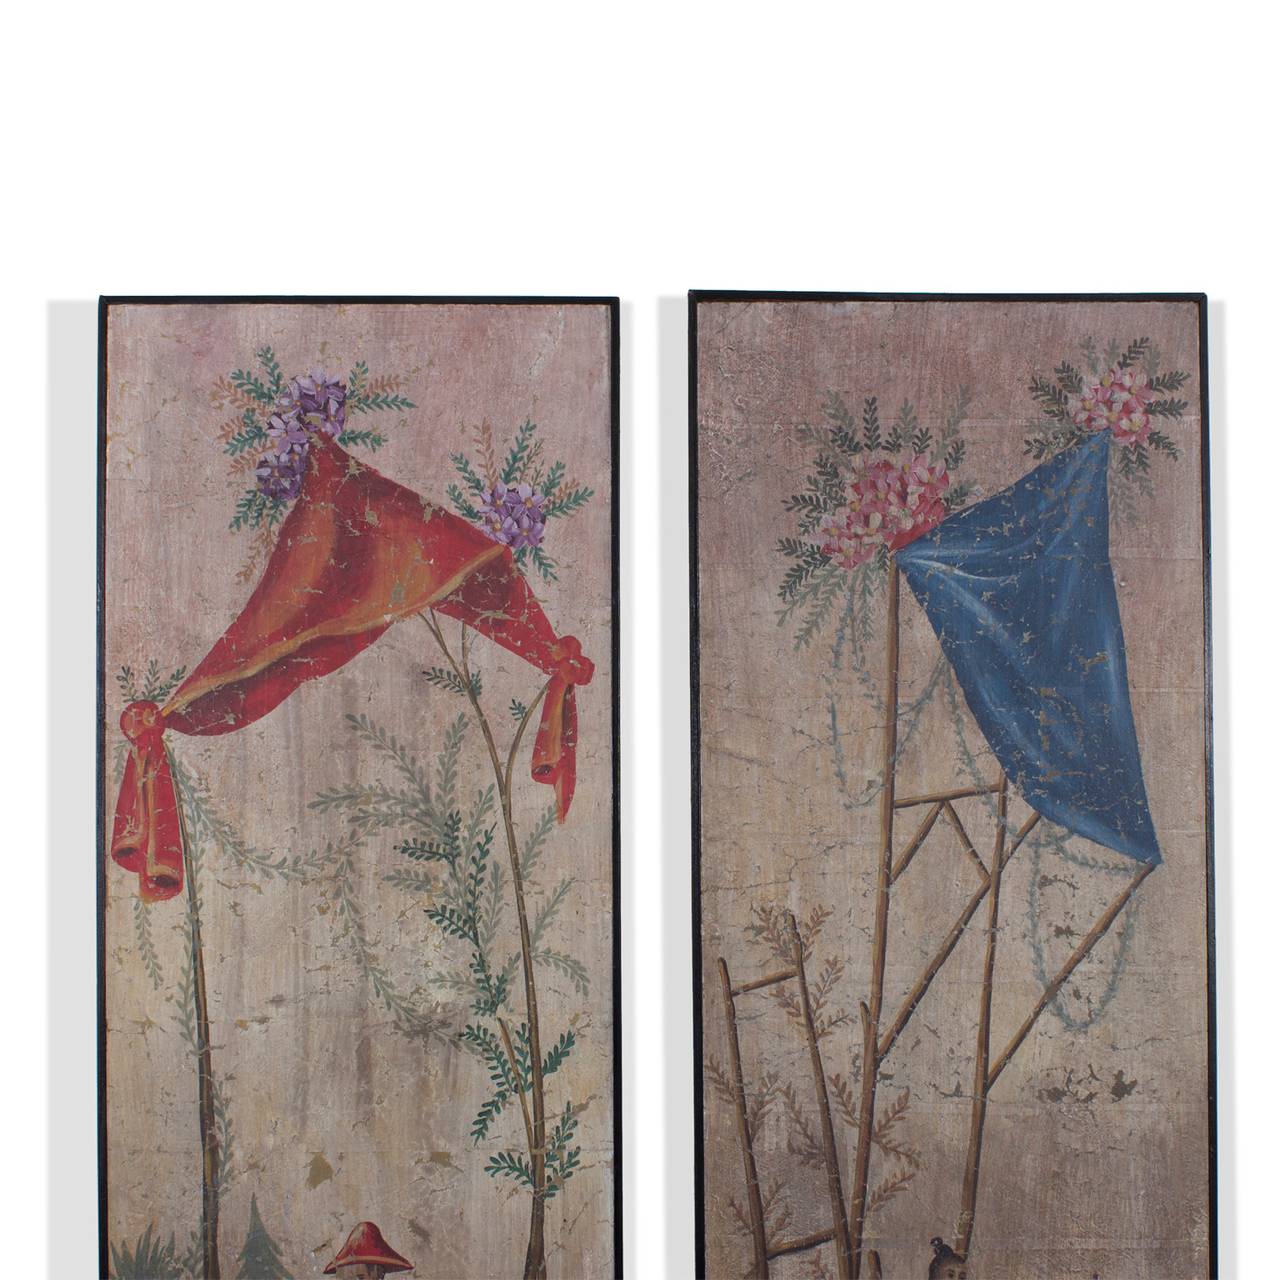 A pair of 19th C. of highly decorative hand painted,  chinoiserie wall paper panels, mounted on board, at a later date,  having a rustic warm patina and depicting garden courting scenes set with birds, flowers and trees. Classical style with a mid